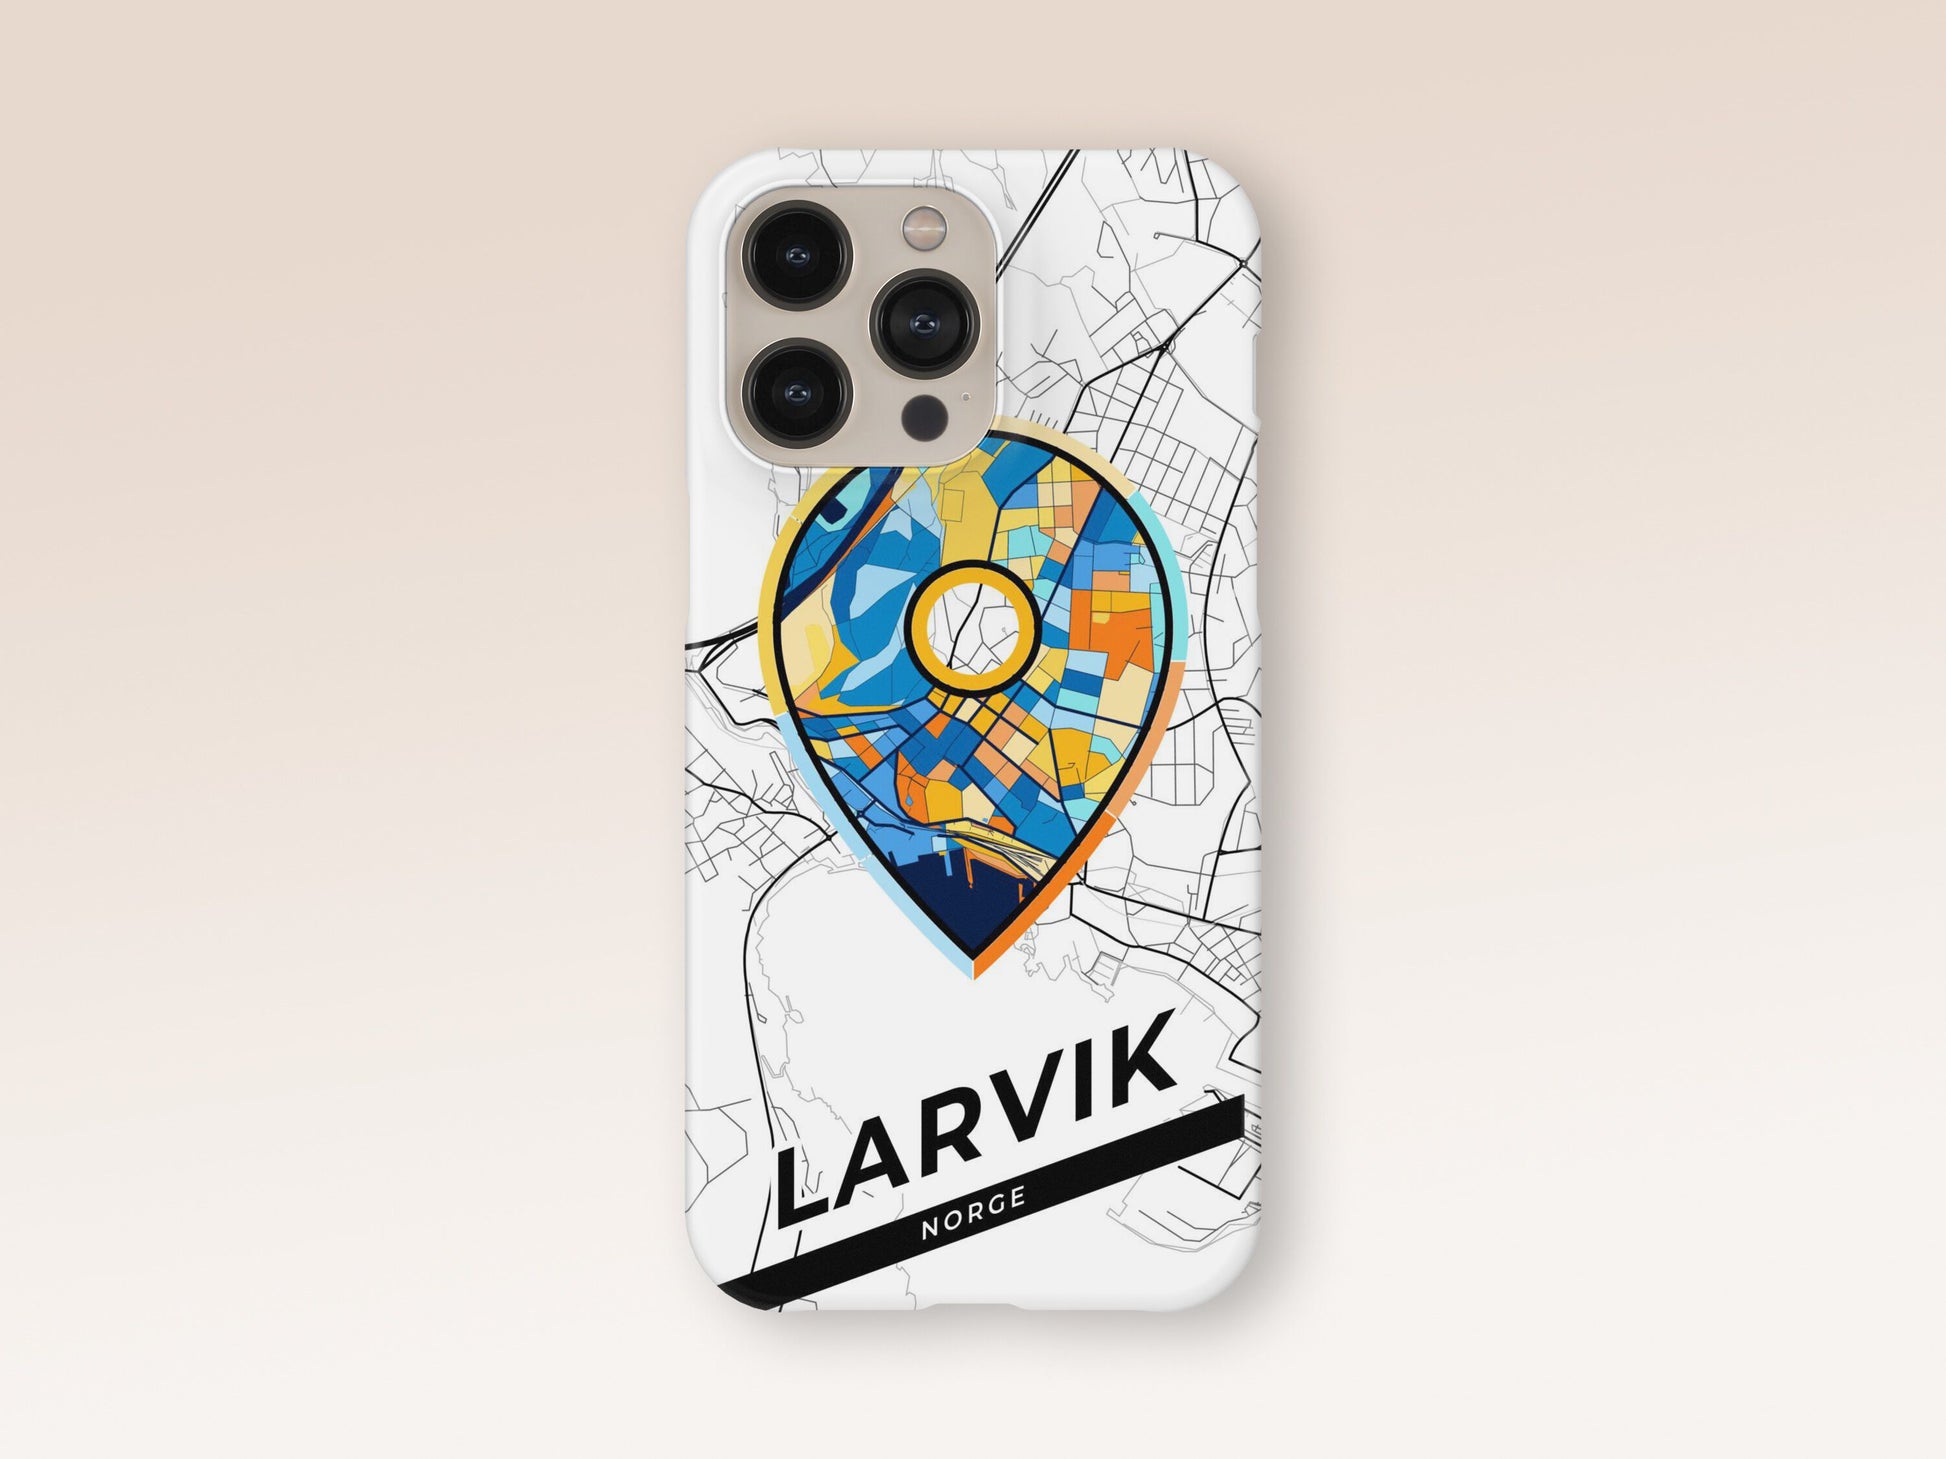 Larvik Norway slim phone case with colorful icon. Birthday, wedding or housewarming gift. Couple match cases. 1